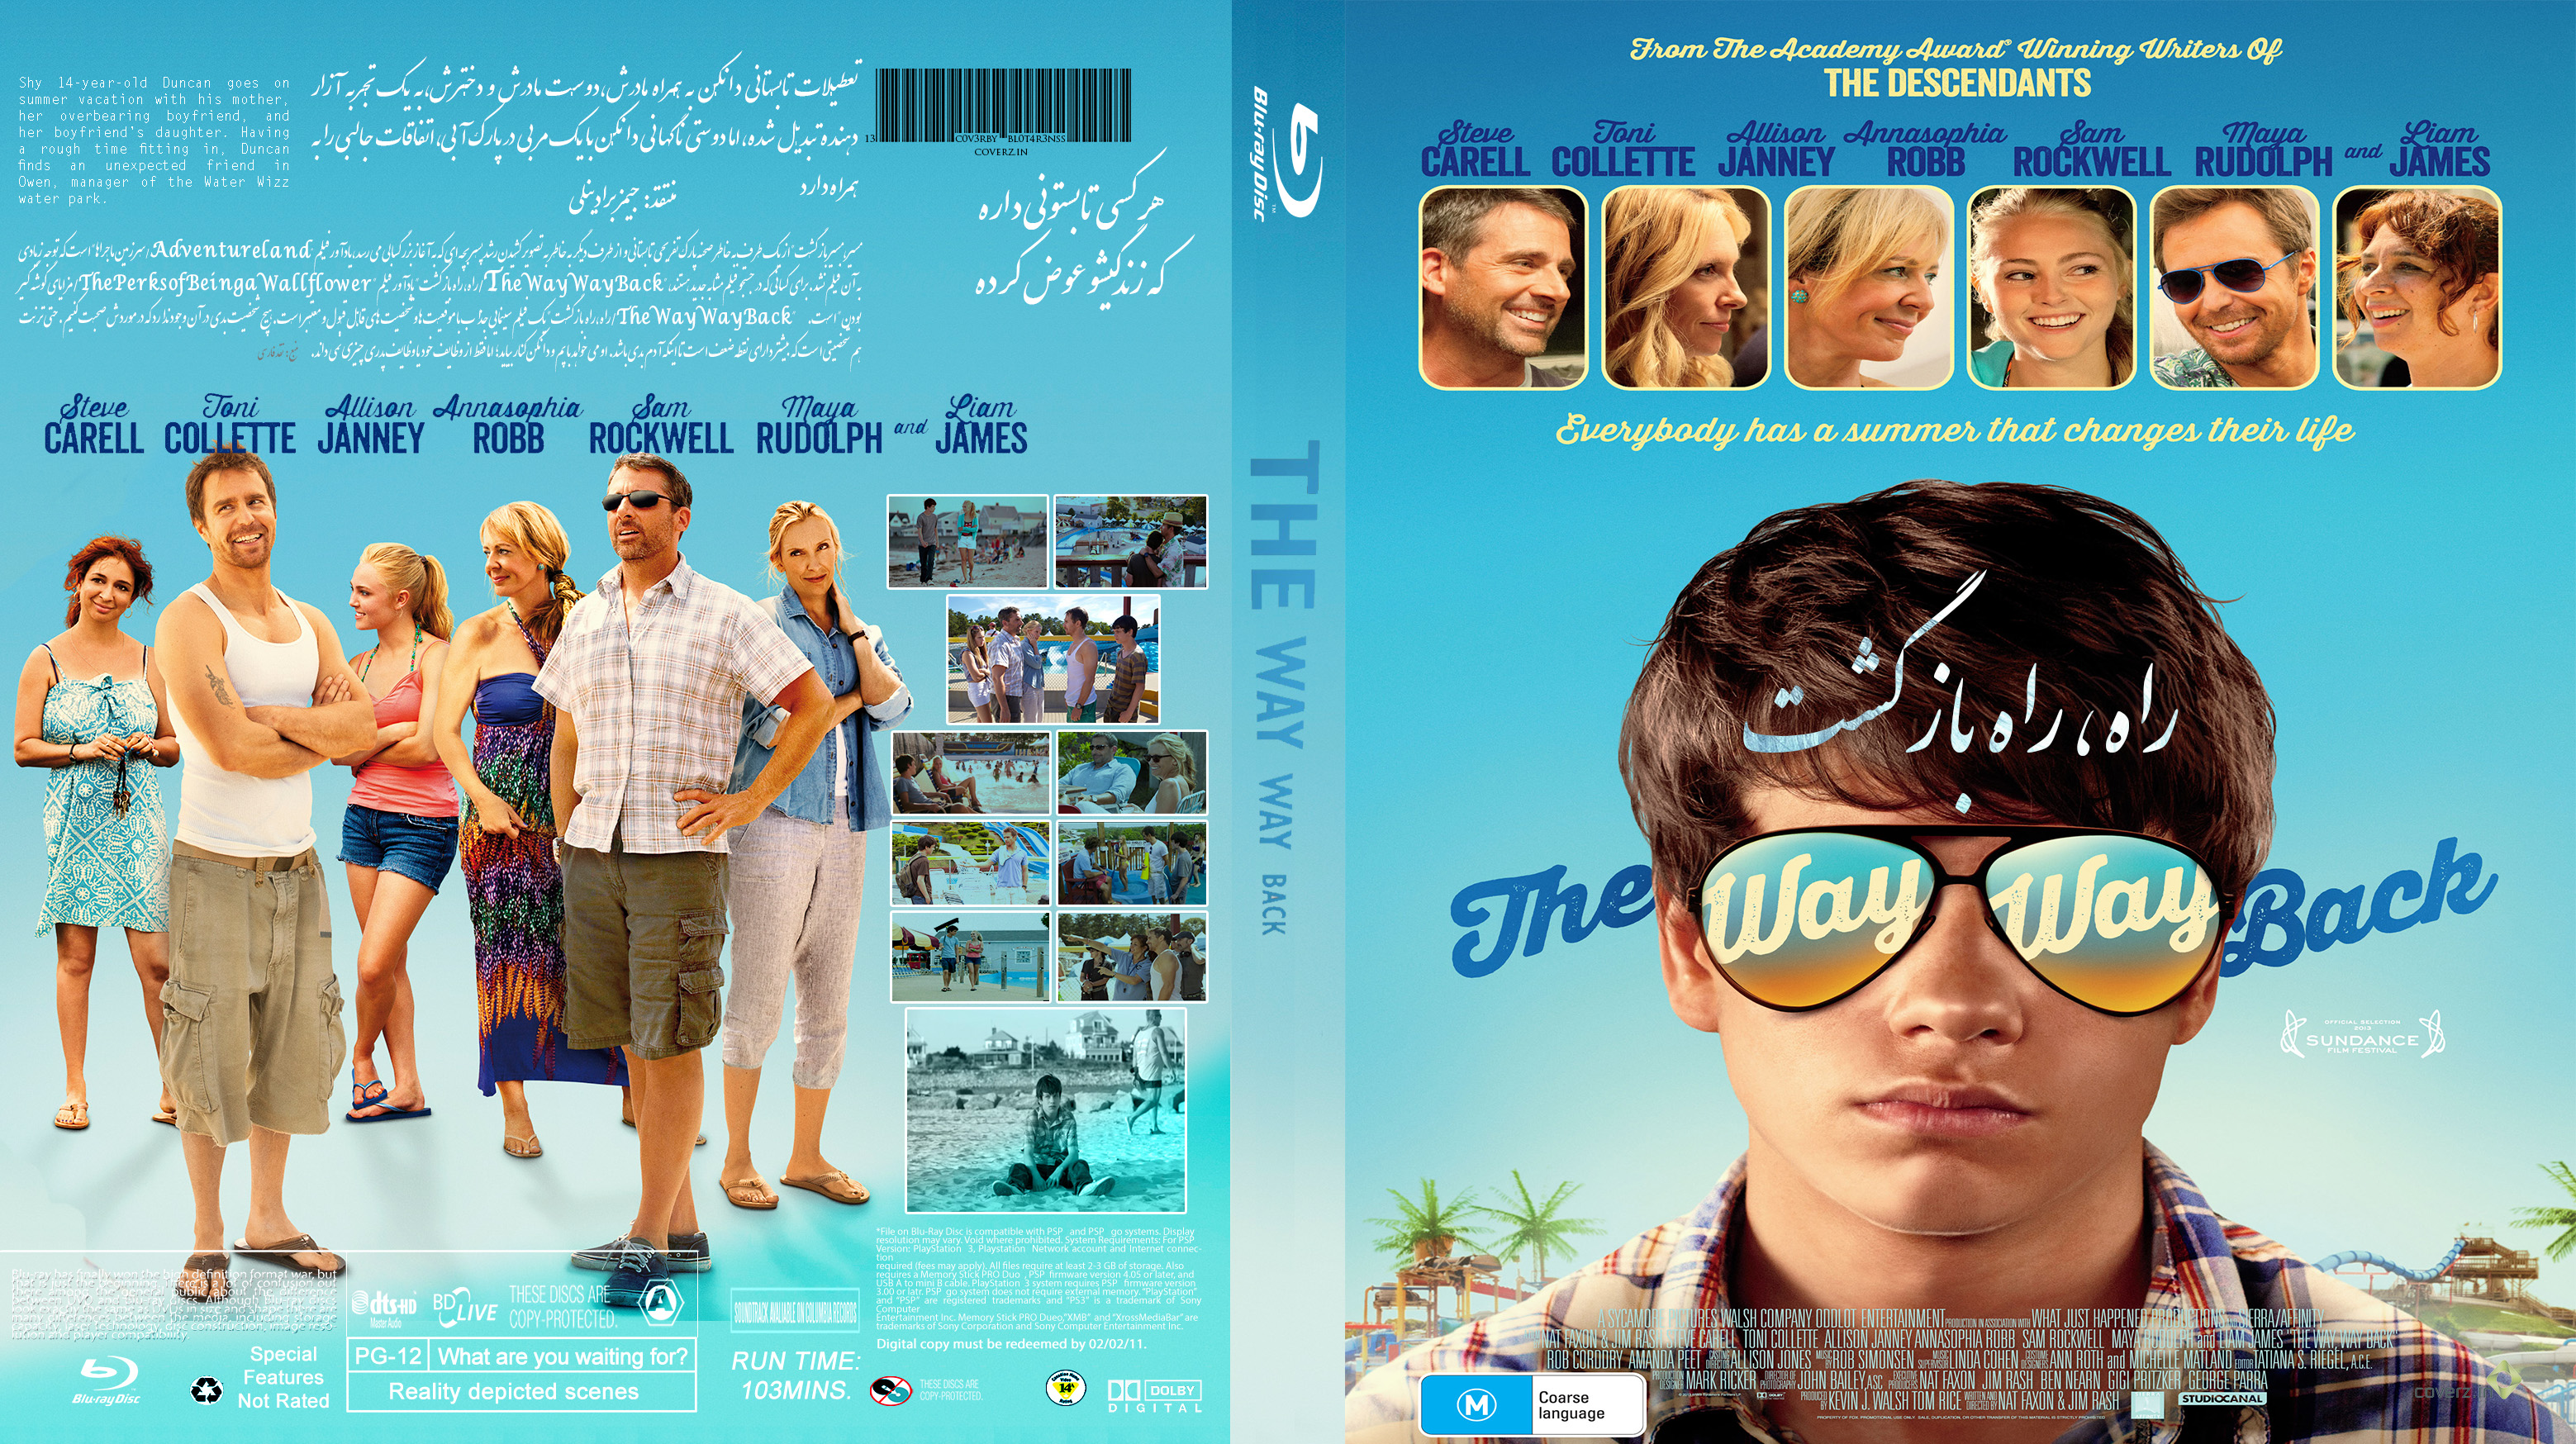 The way back 2020. Parkland 2013 DVD Cover. Movie Cover. Wasnatch Front to back 2013 обложка.